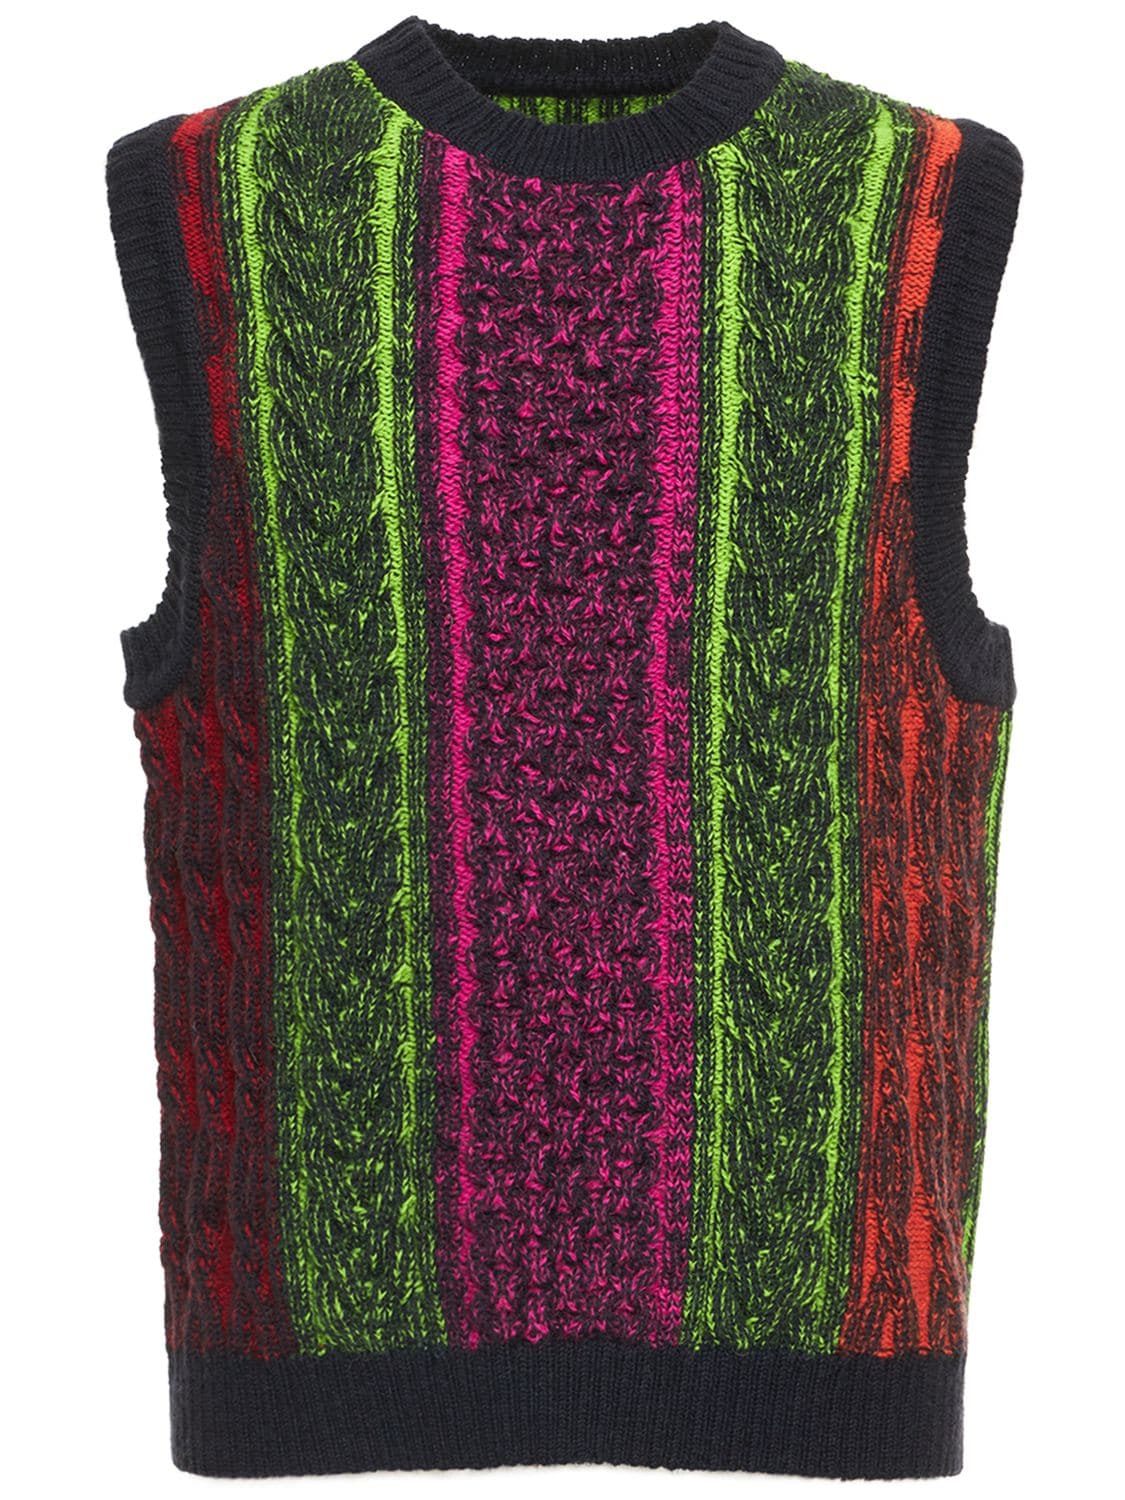 AGR NEON CABLE JACQUARD WOOL KNIT VEST